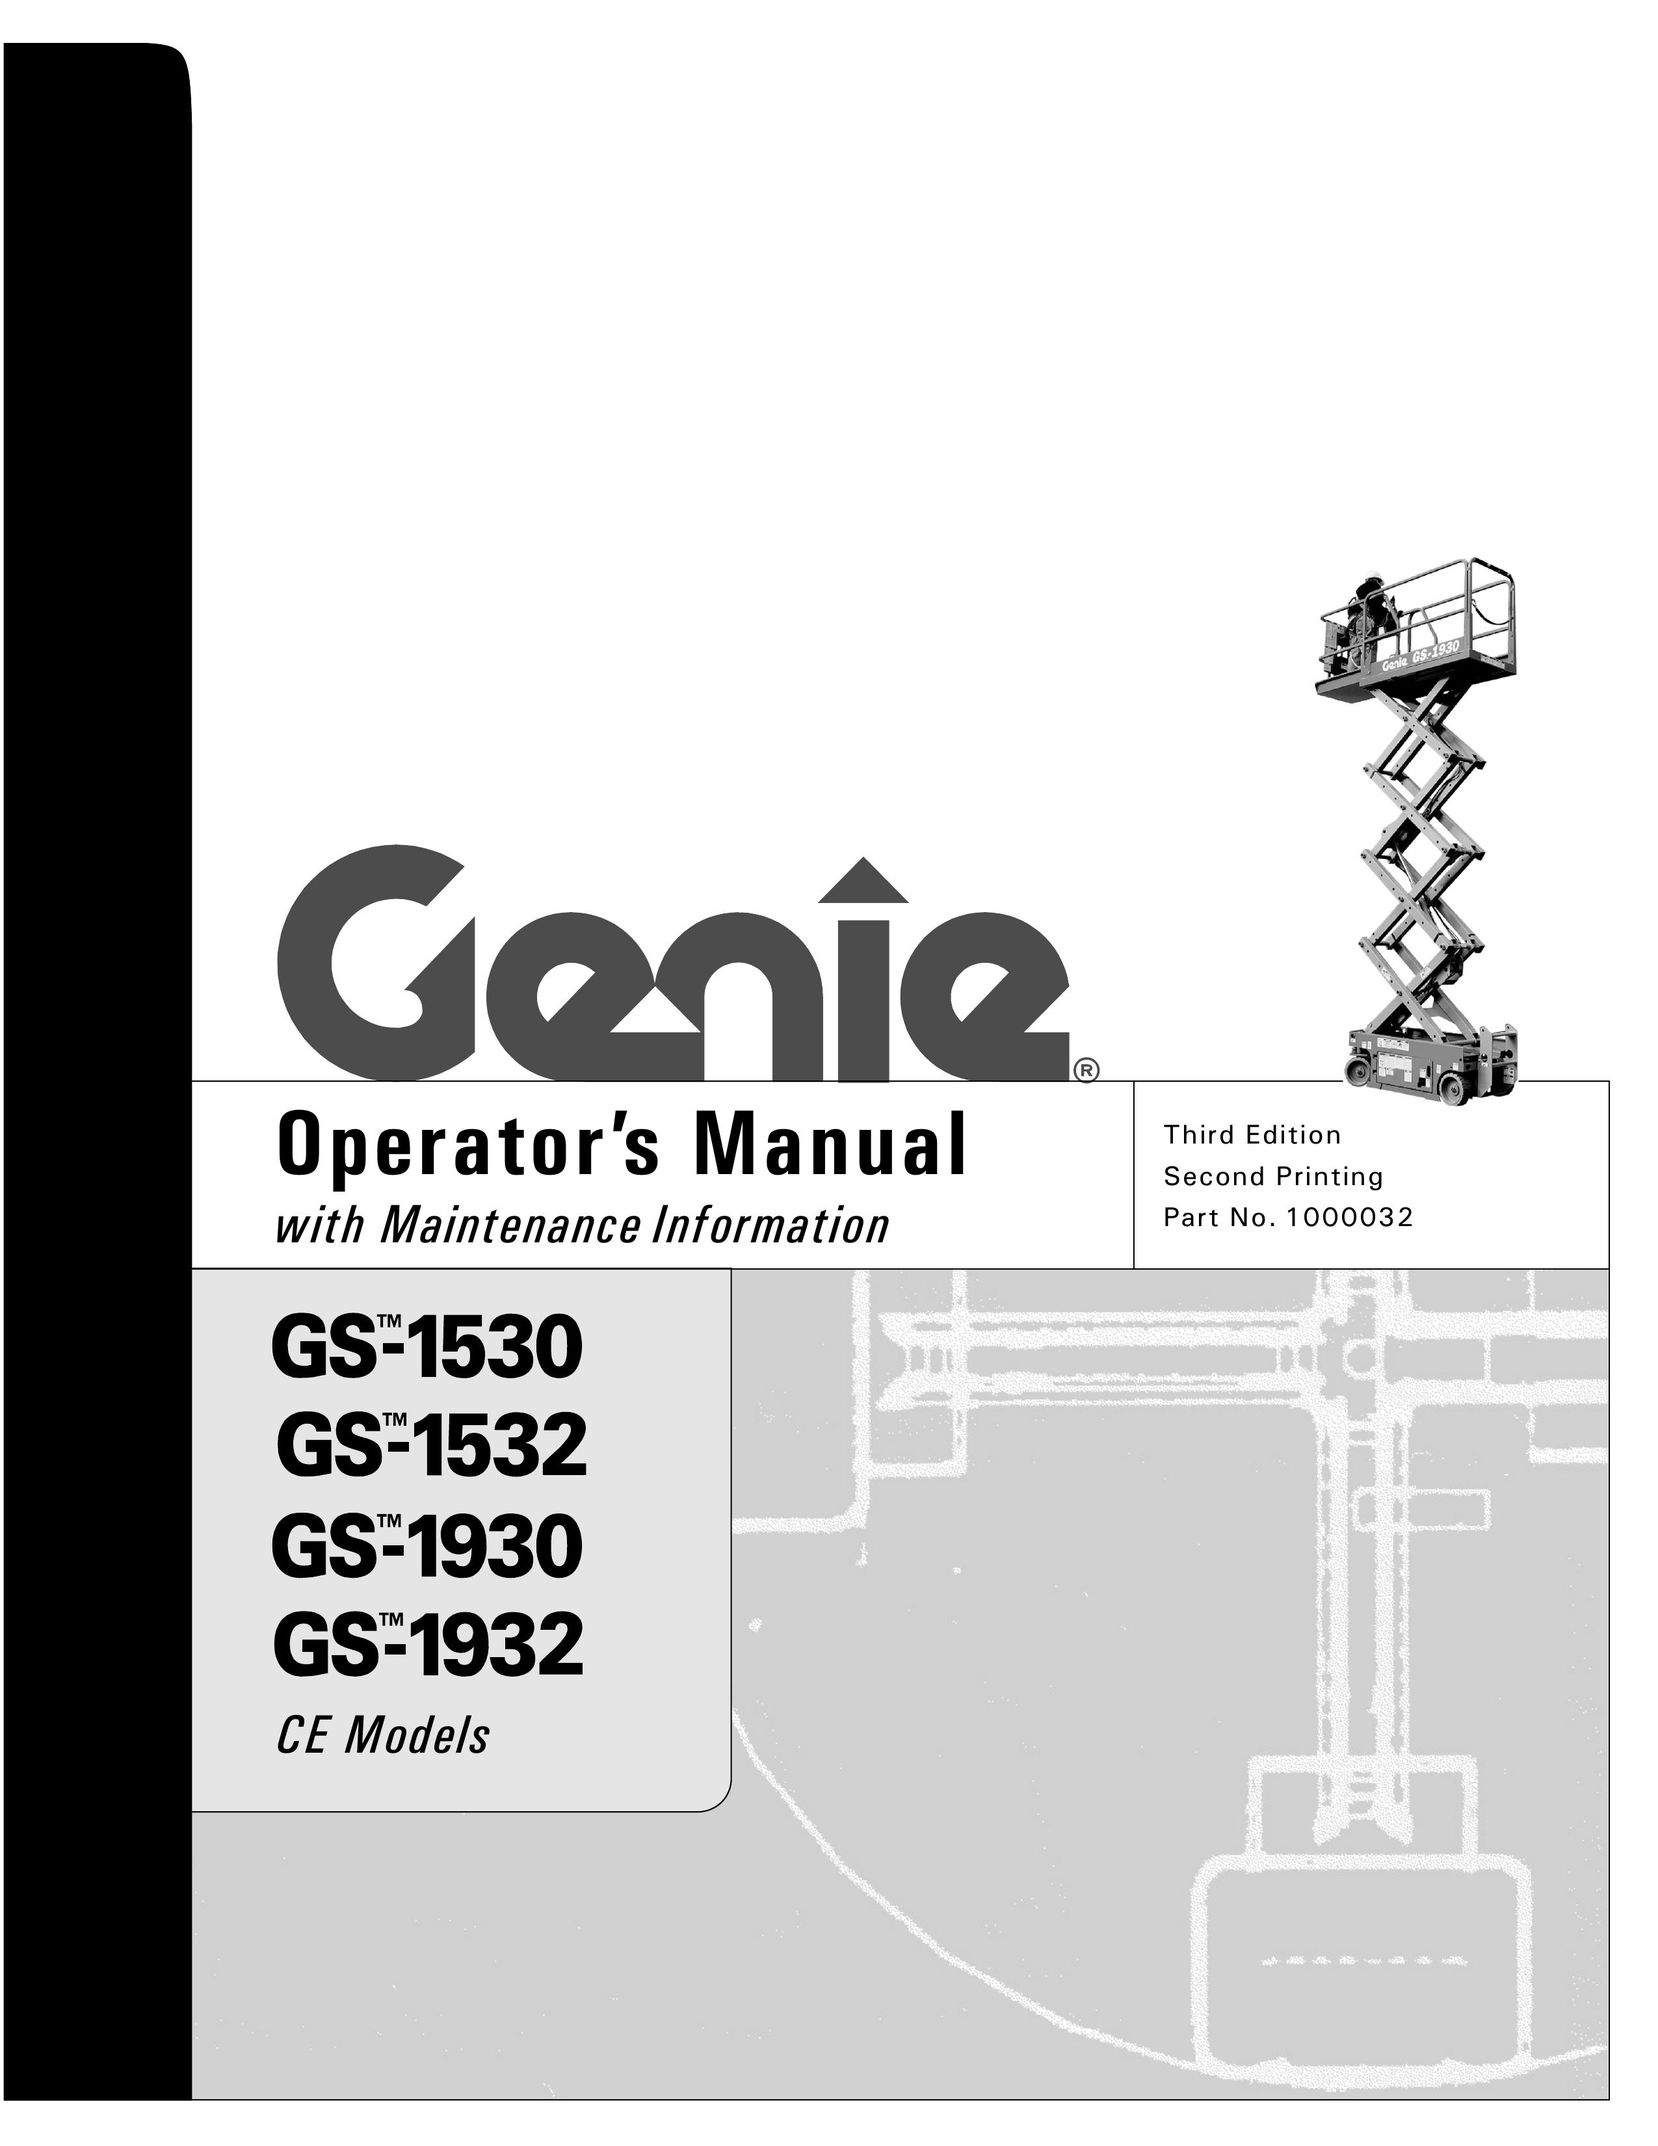 Genie GS-1930 Home Safety Product User Manual